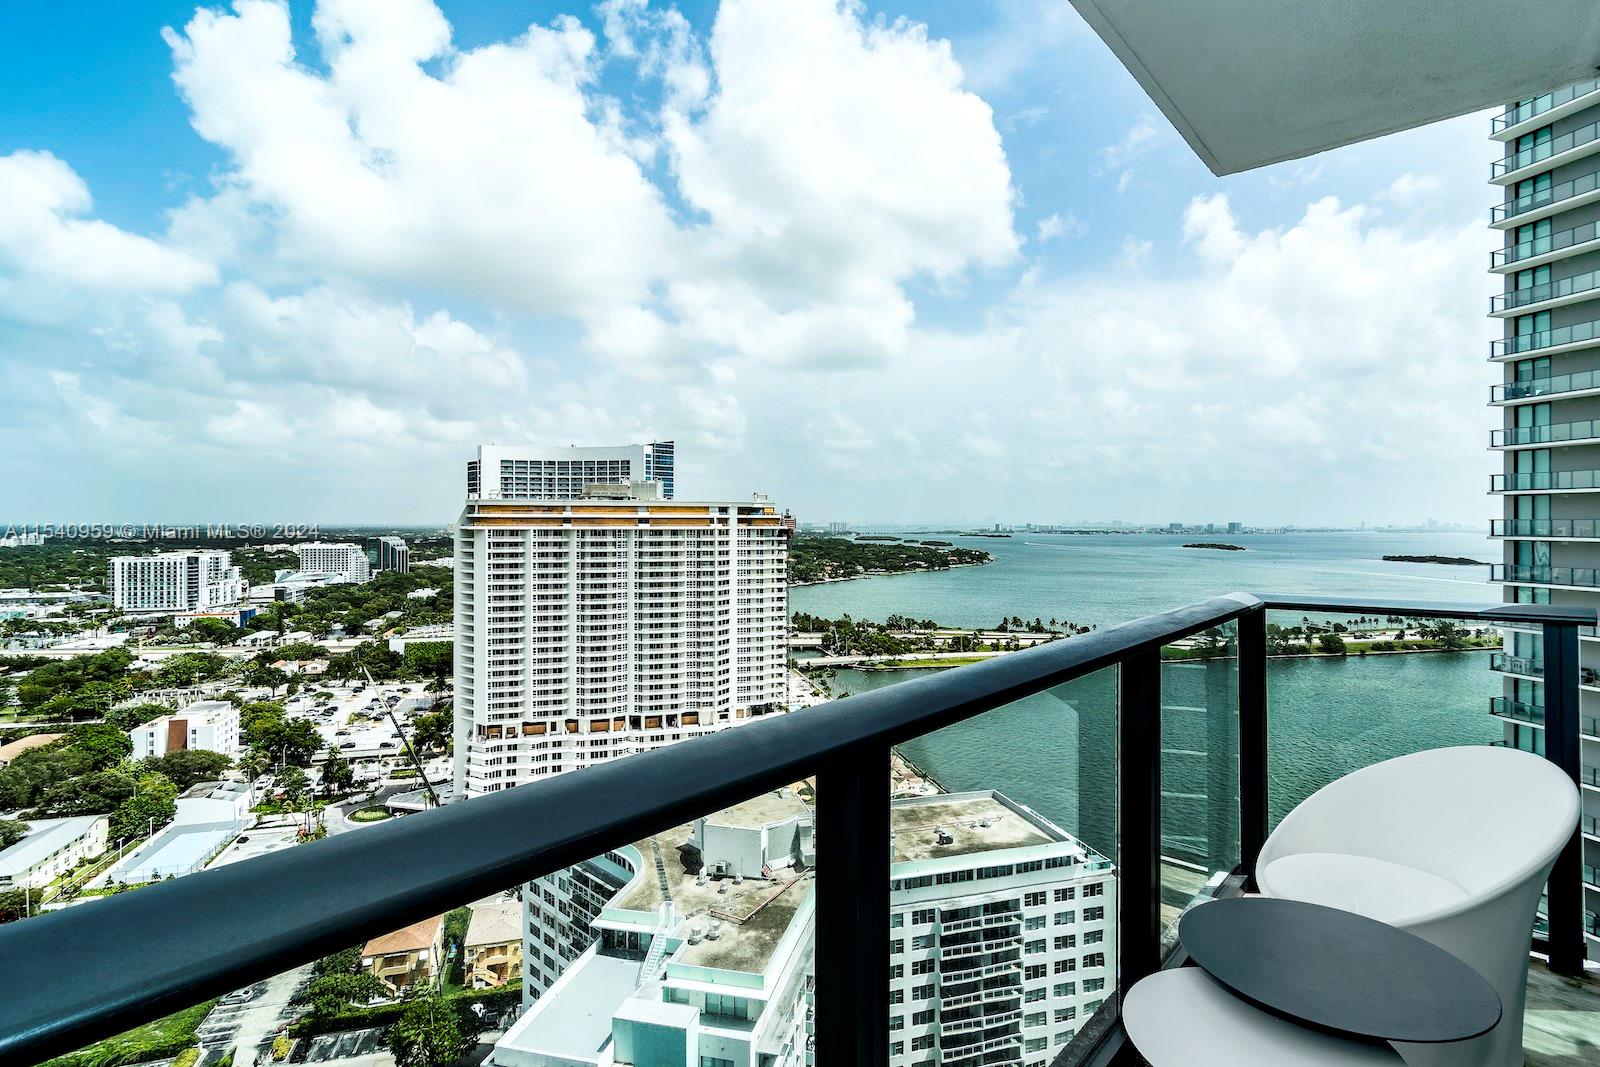 Beautiful corner residence with an abundance of natural light, and beautiful views of the Biscayne Bay and the city. This 1 bed/ 1.5 bath unit features floor-to-ceiling glass windows, 9 ft ceilings, Italkraft kitchen cabinetry, Bosch appliances, quartz countertop, shades & blackouts, and a private foyer. The unit is in great condition, ready to move in. A full-service building Paraiso Bay offers several amenities including tennis courts, a luxury health spa with sauna & steam room, a resort-style pool, fitness center, cinema, wine cellar, party room, pedestrian-friendly street, and 24-hour security, front desk, & valet. Fully furnished unit.